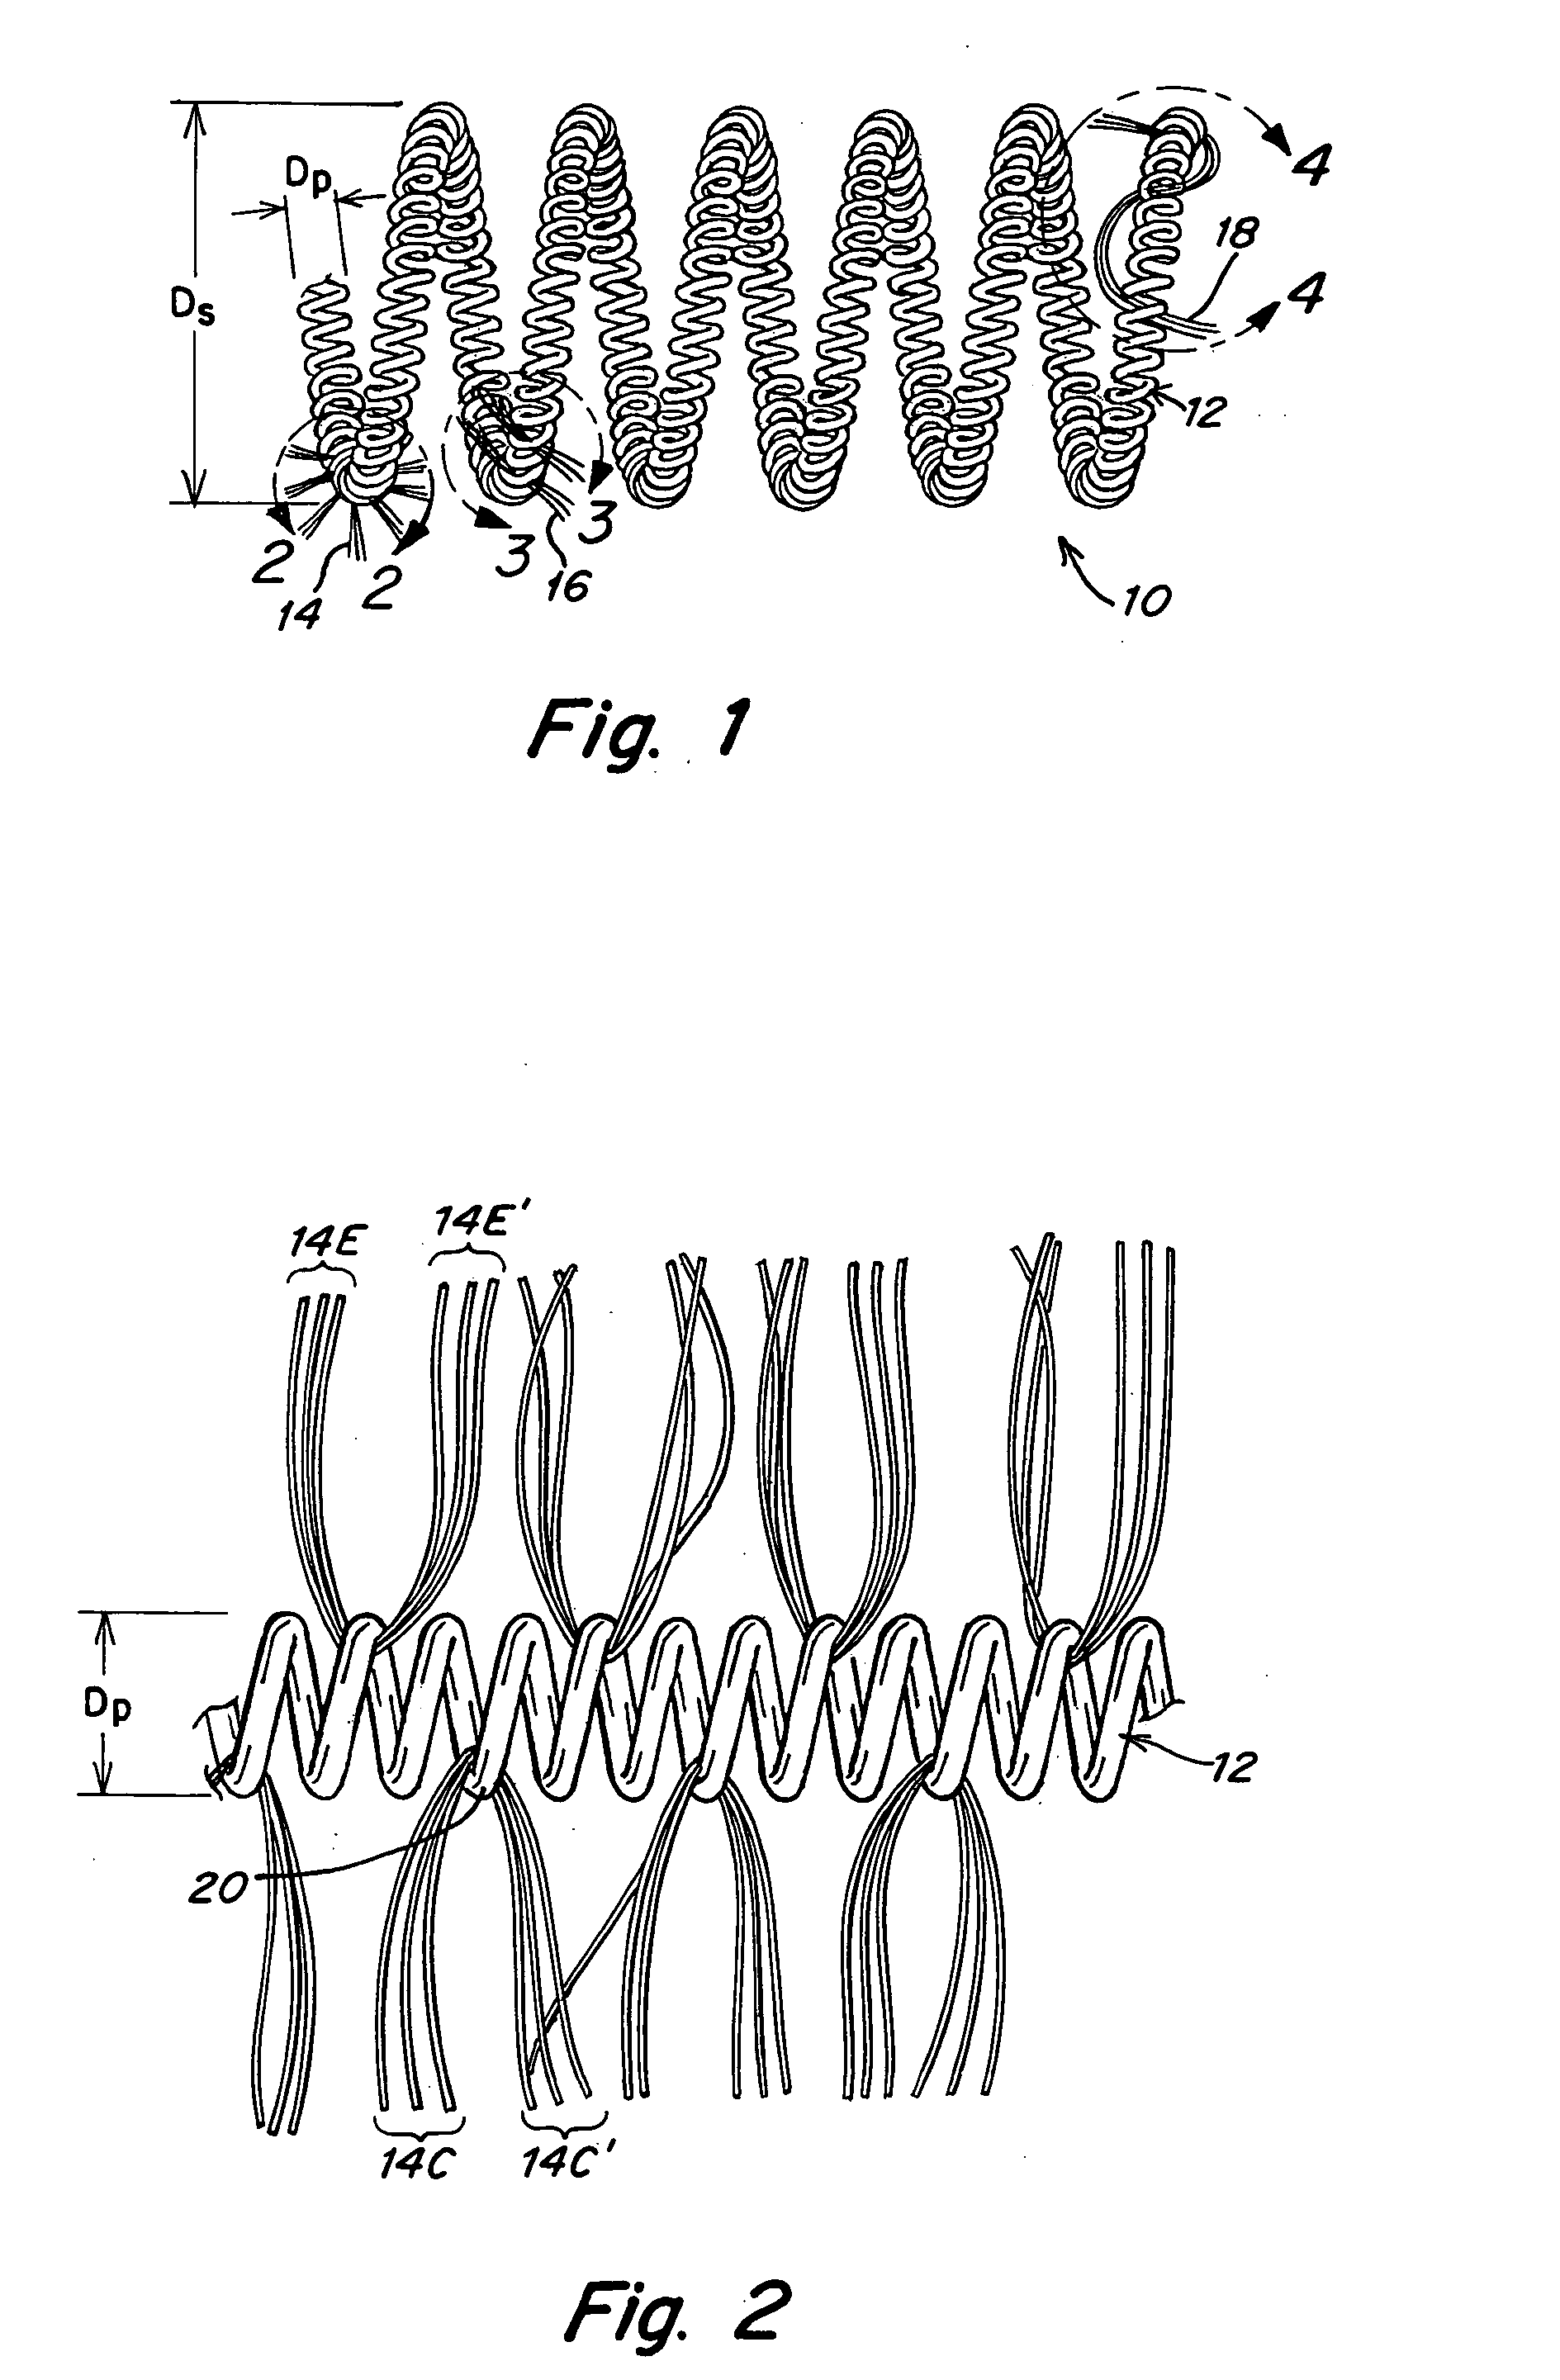 Metallic coils enlaced with biological or biodegradable or synthetic polymers or fibers for embolization of a body cavity